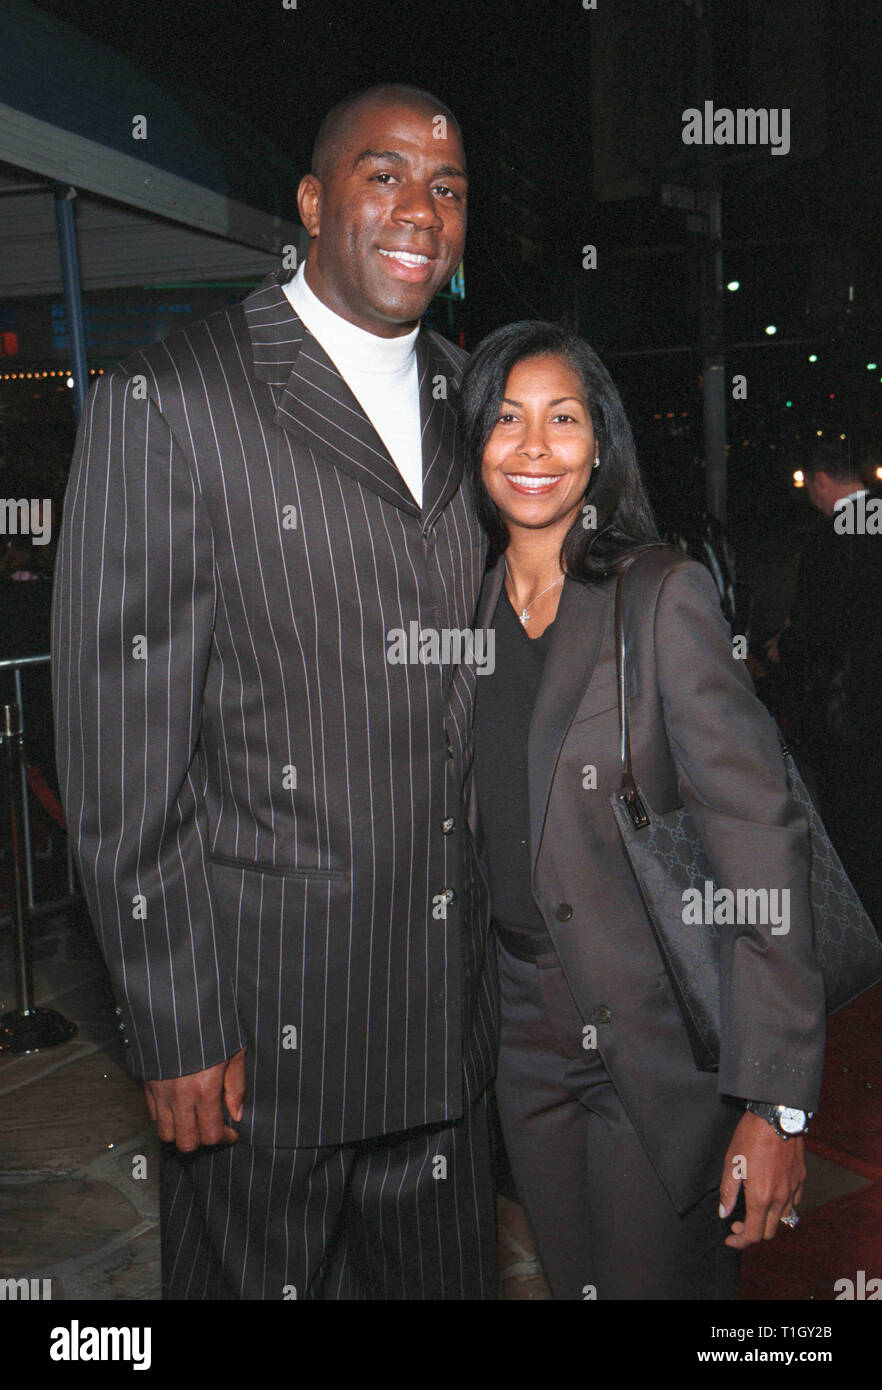 LOS ANGELES, CA - April 14, 1999: Former basketball star EARVIN 'MAGIC' JOHNSON & wife COOKIE JOHNSON at the world premiere in Los Angeles of 'Life' which stars Eddie Murphy & Martin Lawrence. © Paul Smith / Featureflash Stock Photo